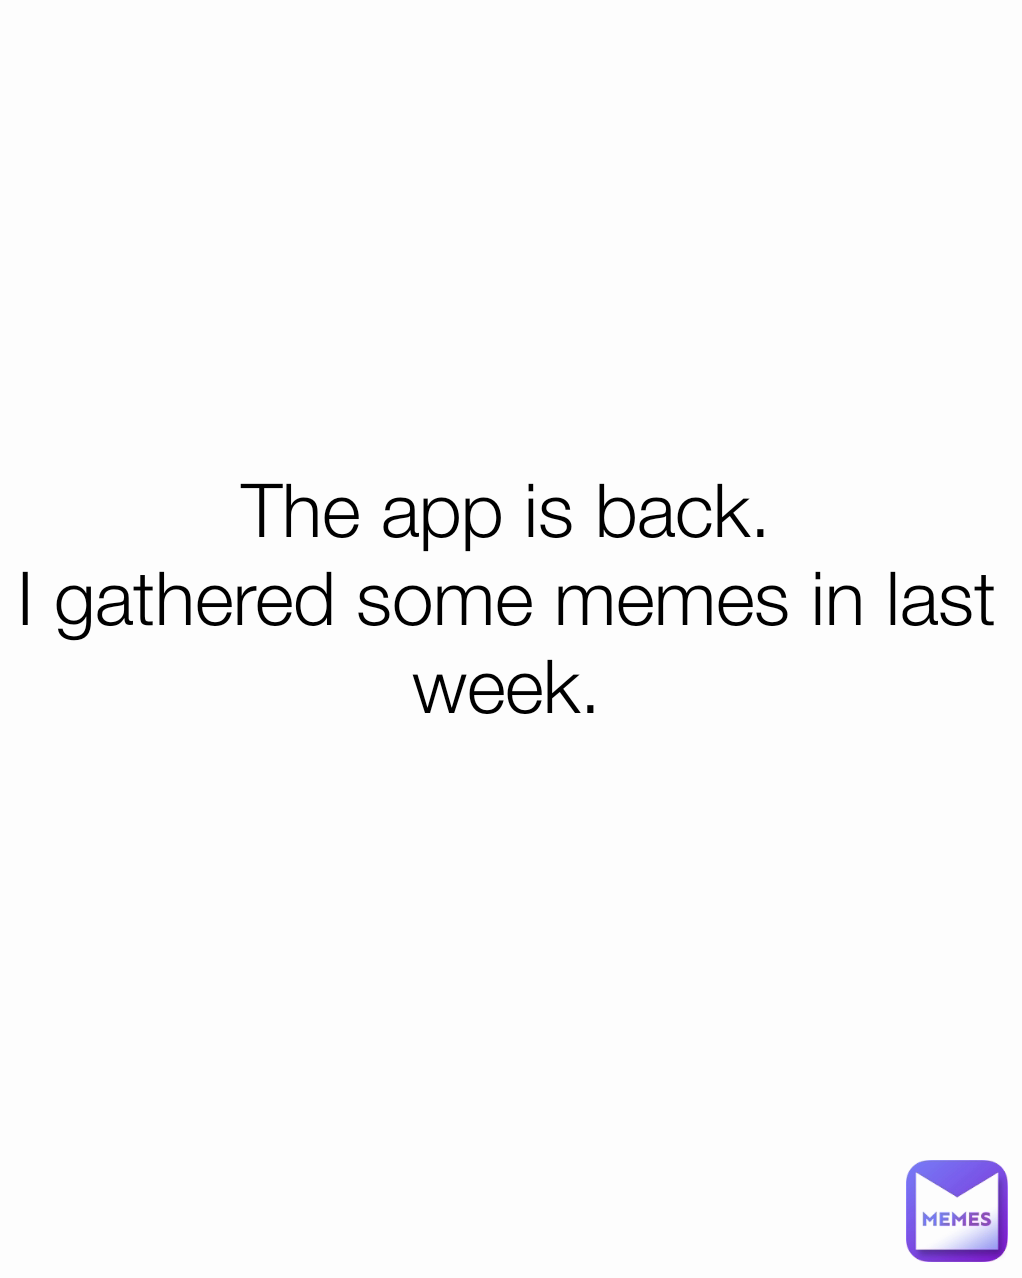 The app is back.
I gathered some memes in last week.